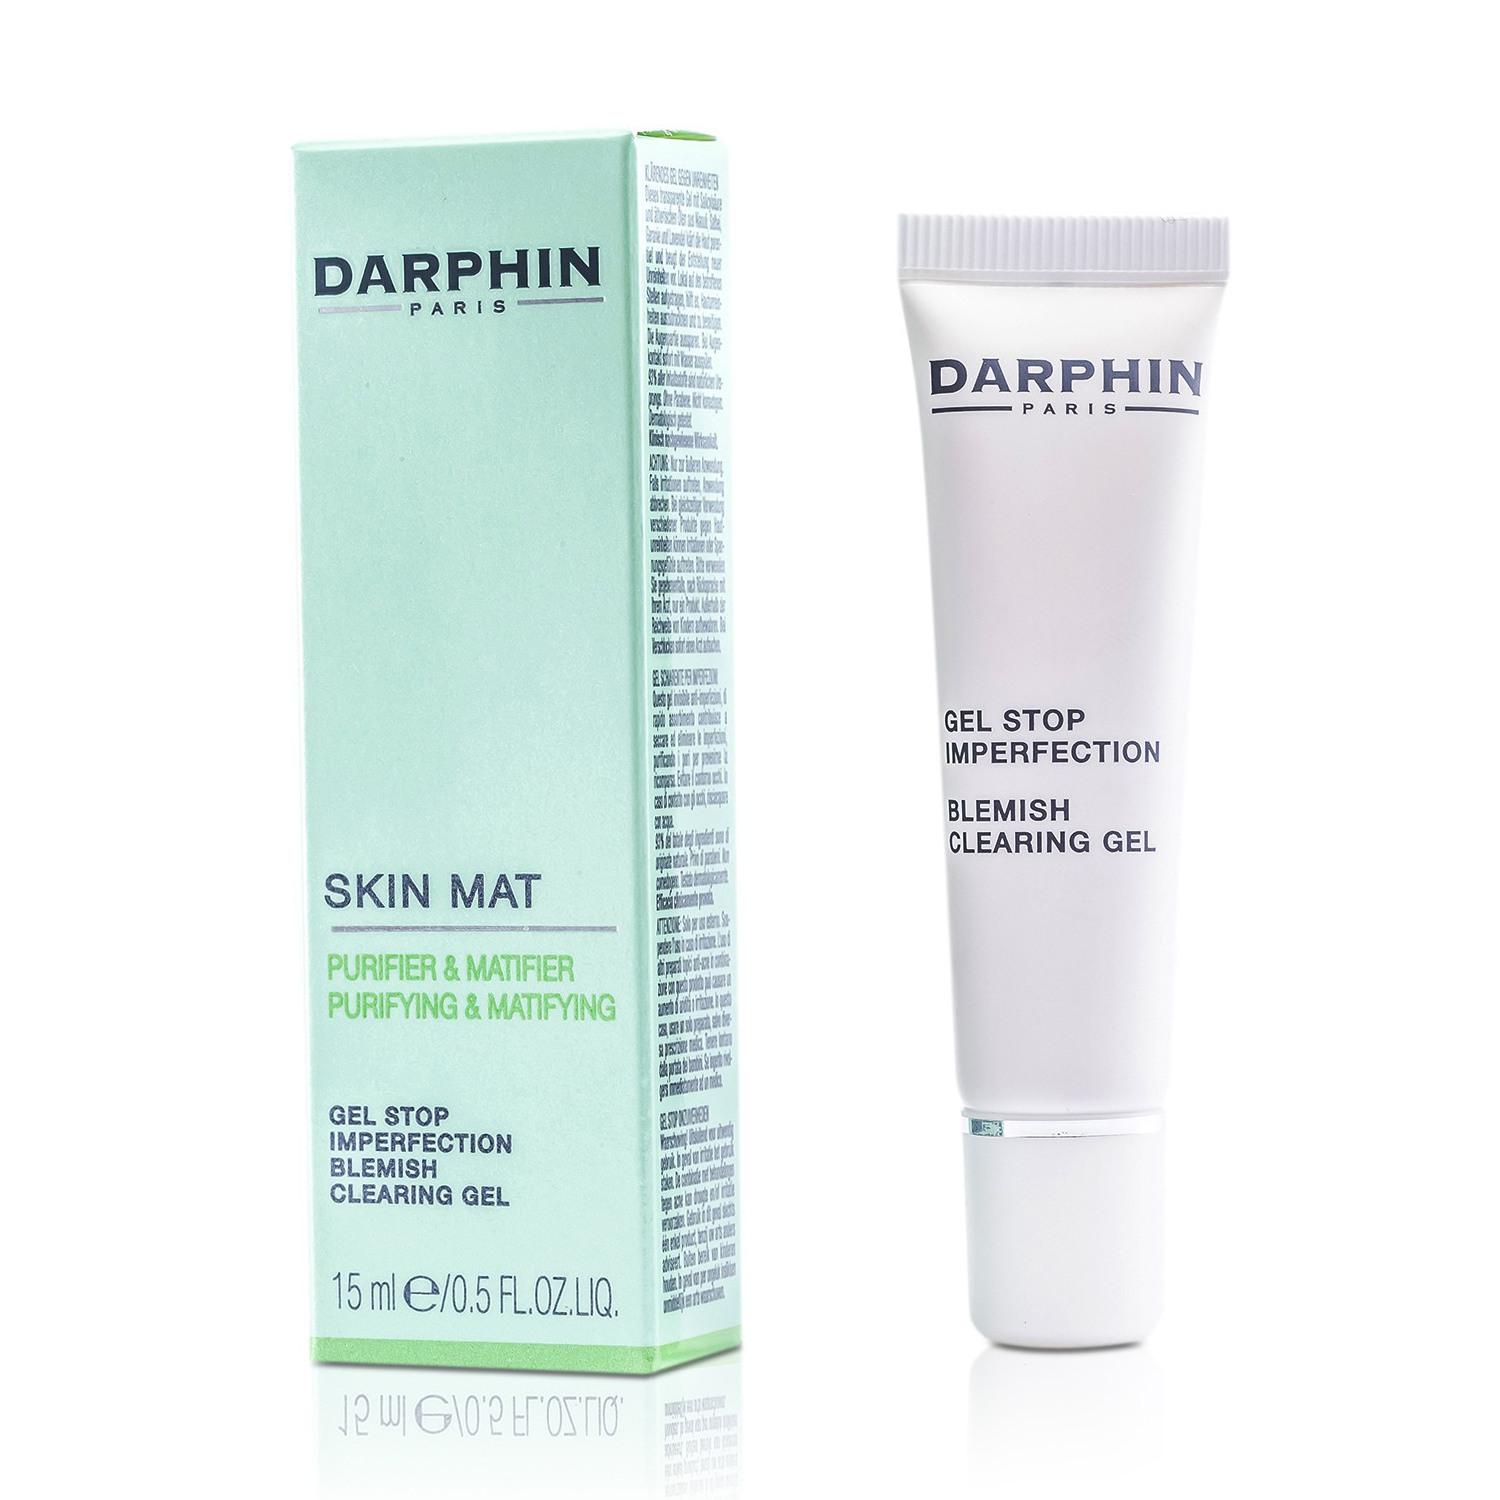 Blemish Clearing Gel (Exp. Date: 06/2018) Darphin Image